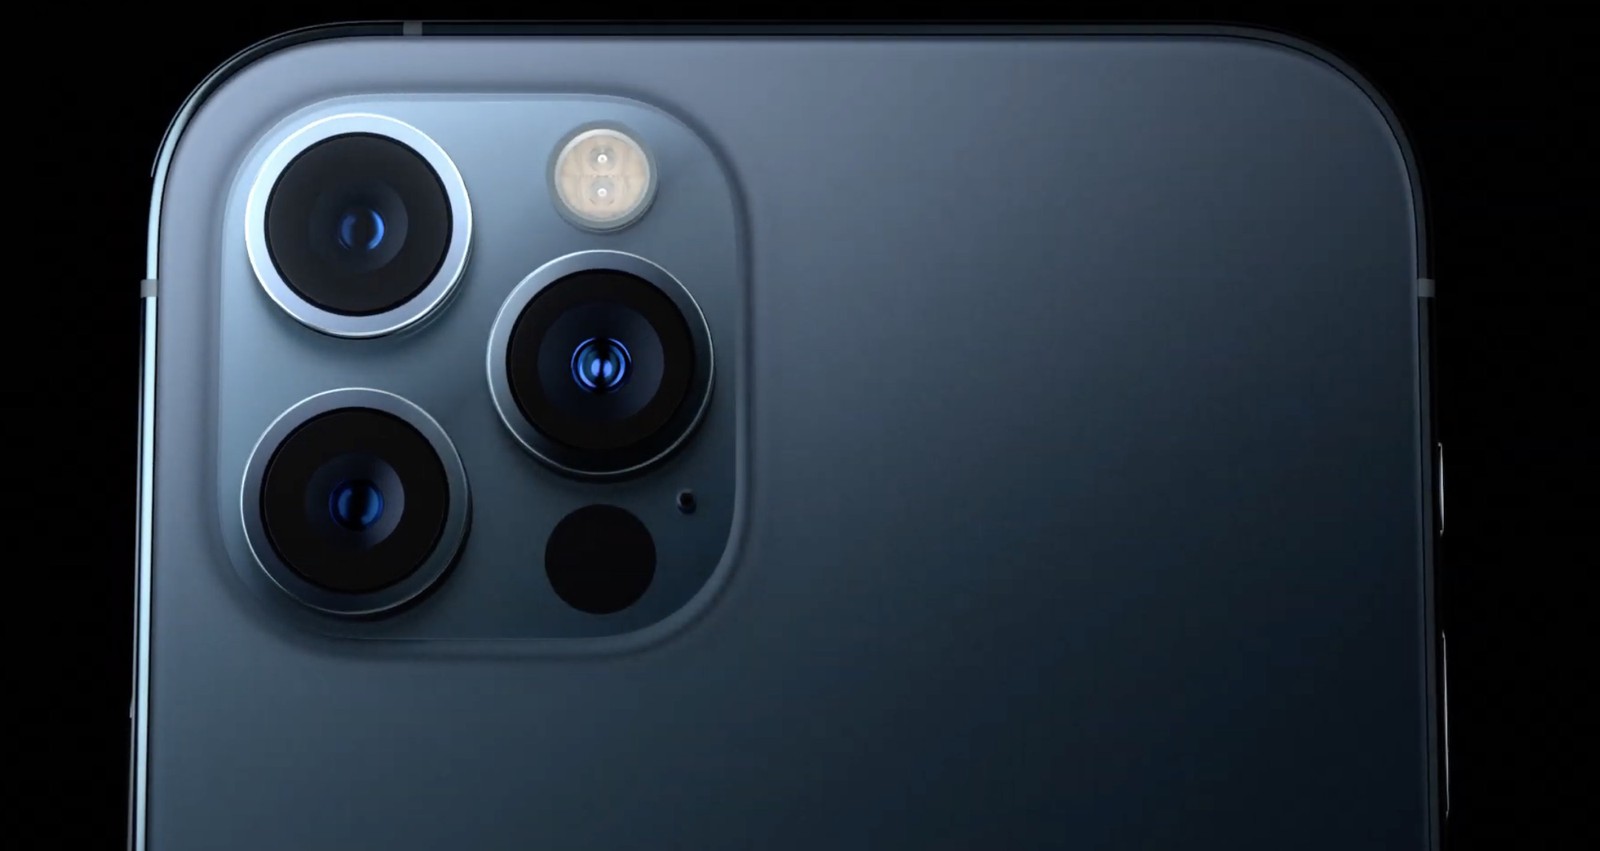 Three Major Camera Improvements May be Coming to iPhone 13 [Updated